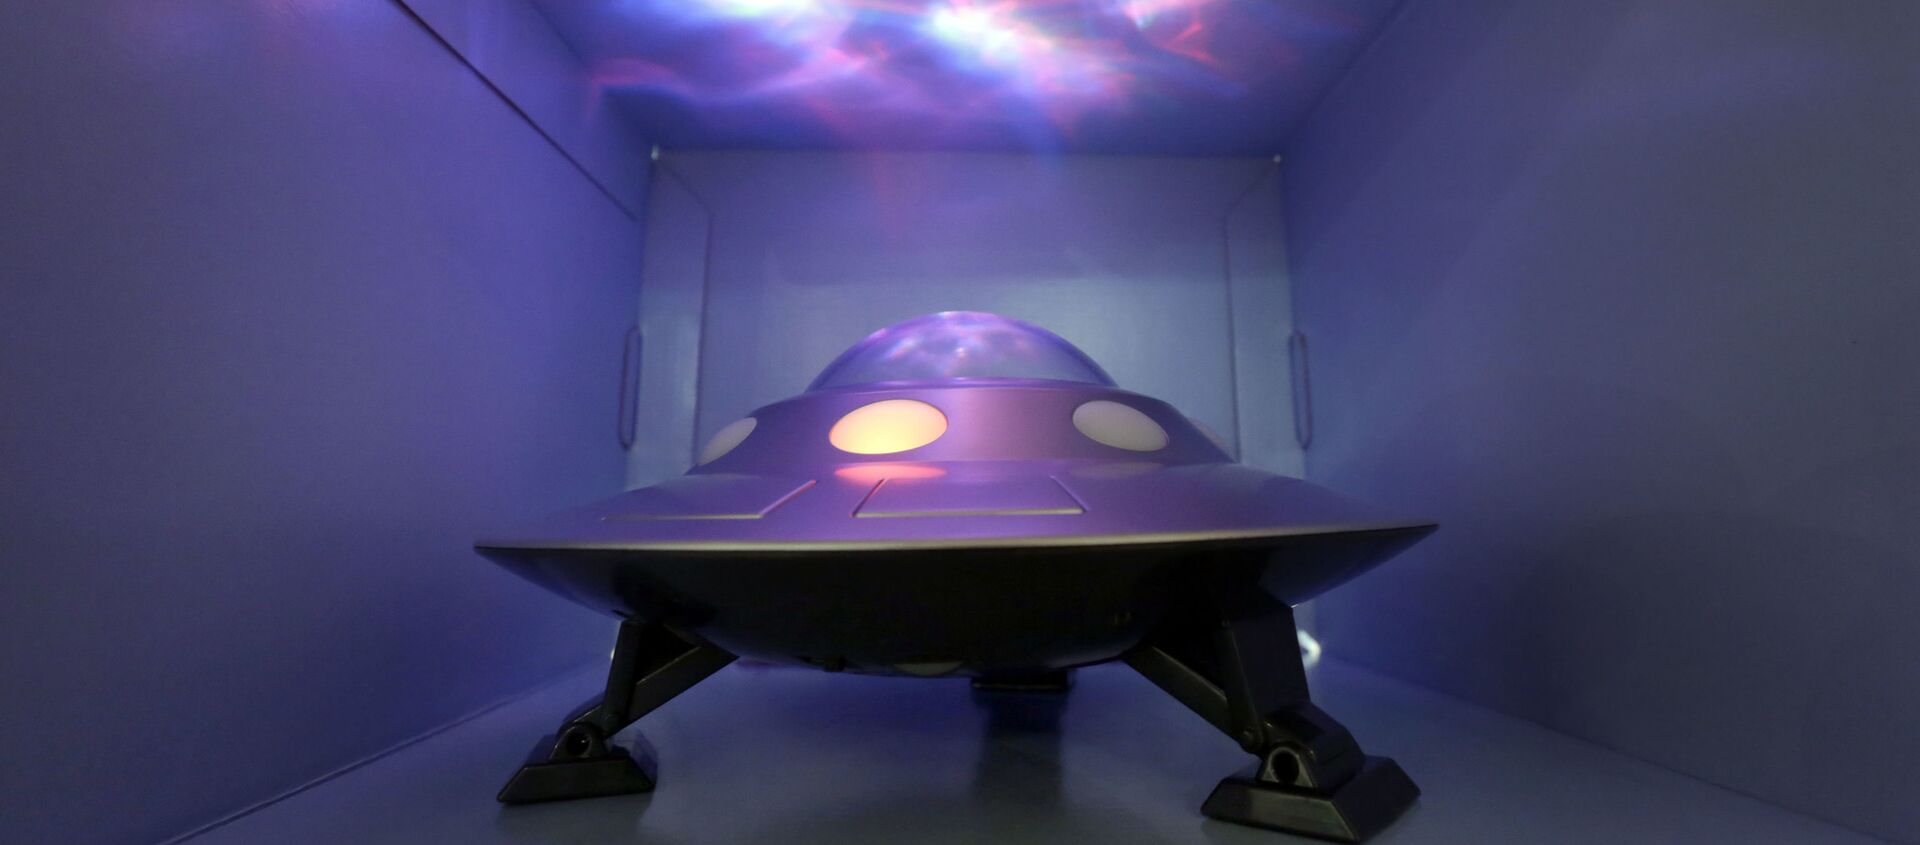 The Cosmic UFO, by Cloud b, that features moving projections of the Norther Lights, is demonstrated at the TTPM Holiday Showcase, in New York, Wednesday, Oct. 1, 2014. - Sputnik International, 1920, 06.07.2021